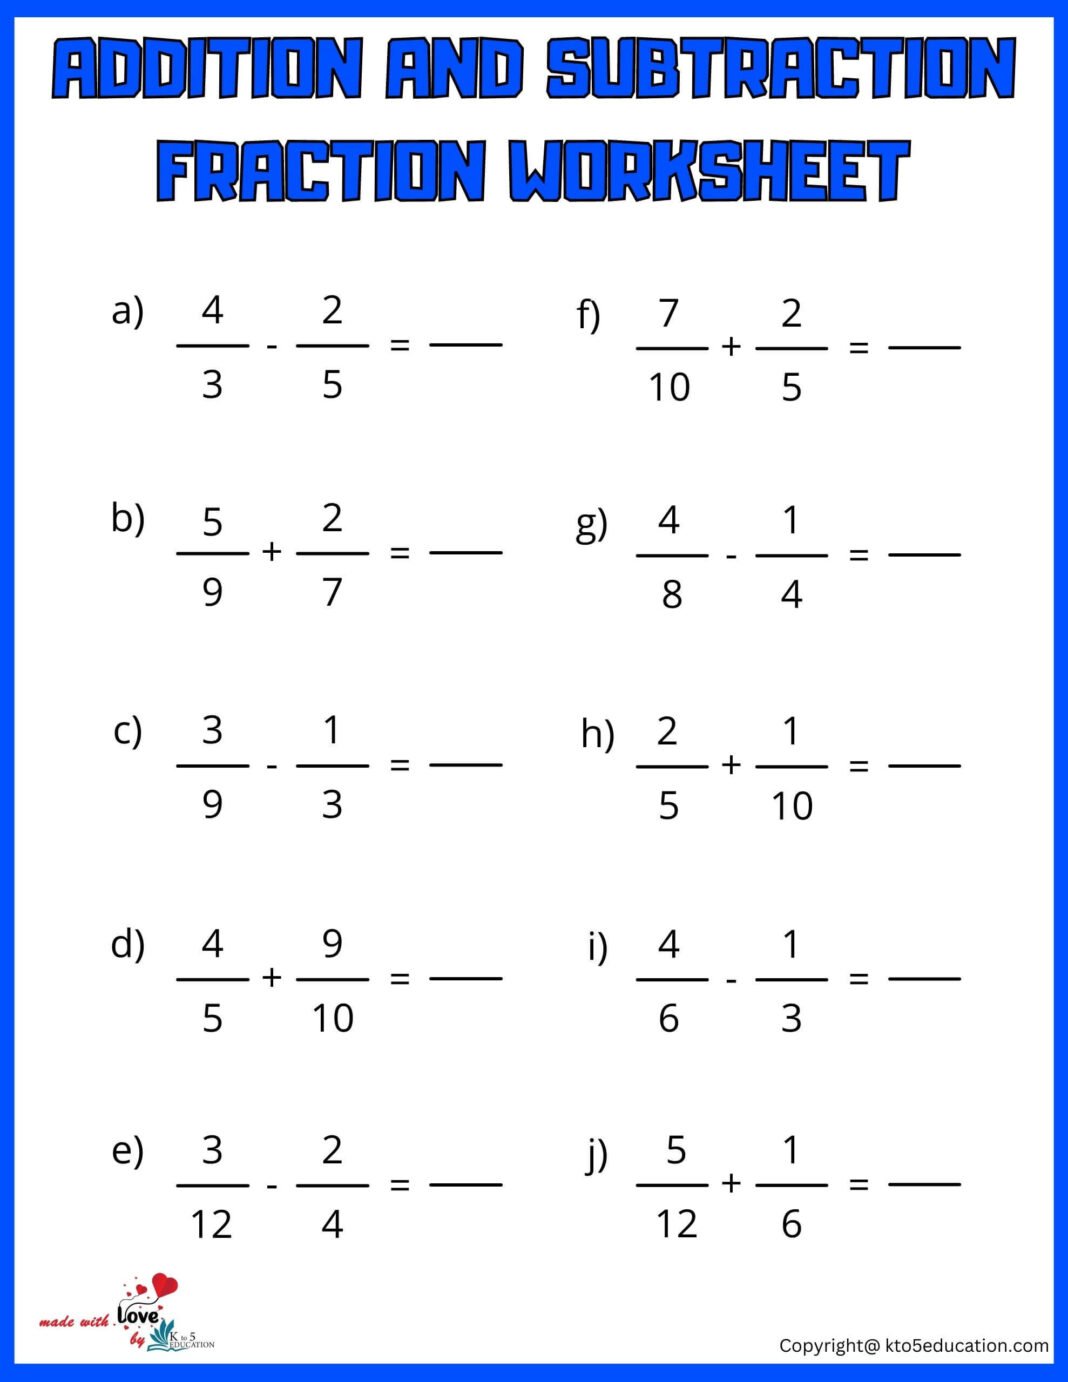 Addition And Subtraction Fraction Worksheet FREE